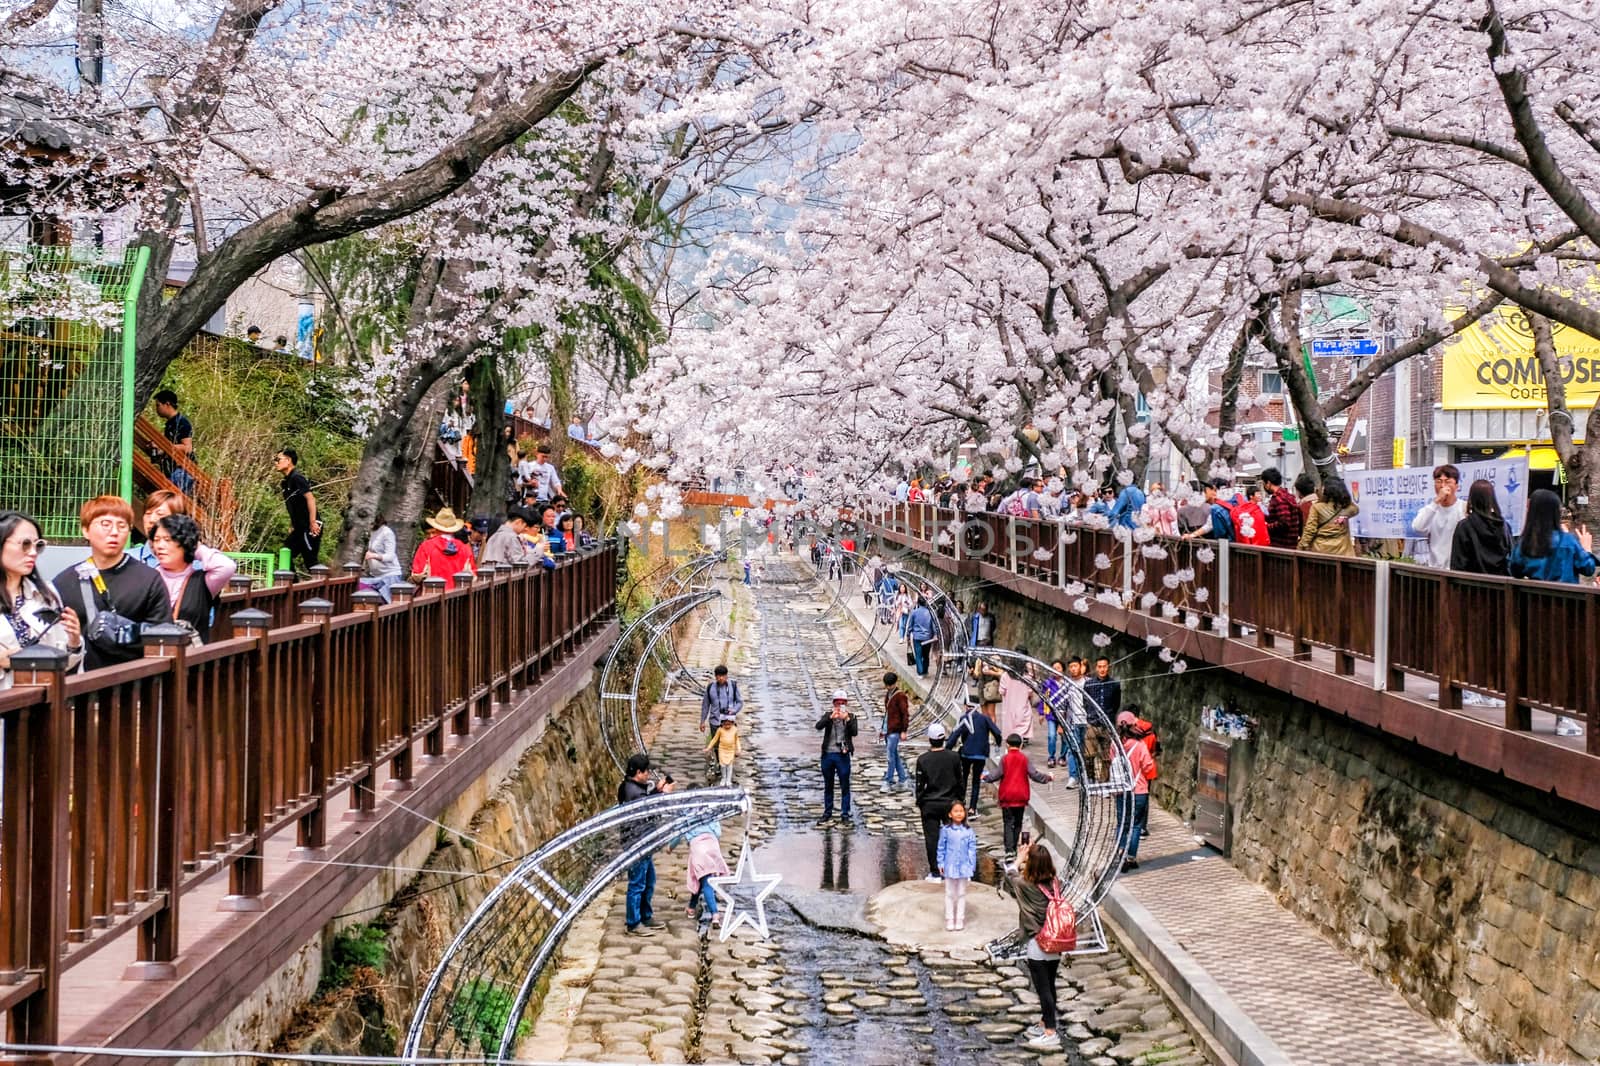 1 APRIL 2018 : Many tourist came to Jinhae, South Korea, to see beautiful blooming Cherry Blossom during Jinhae Gunhangje Festival which was held from 1 to 10 April 2018